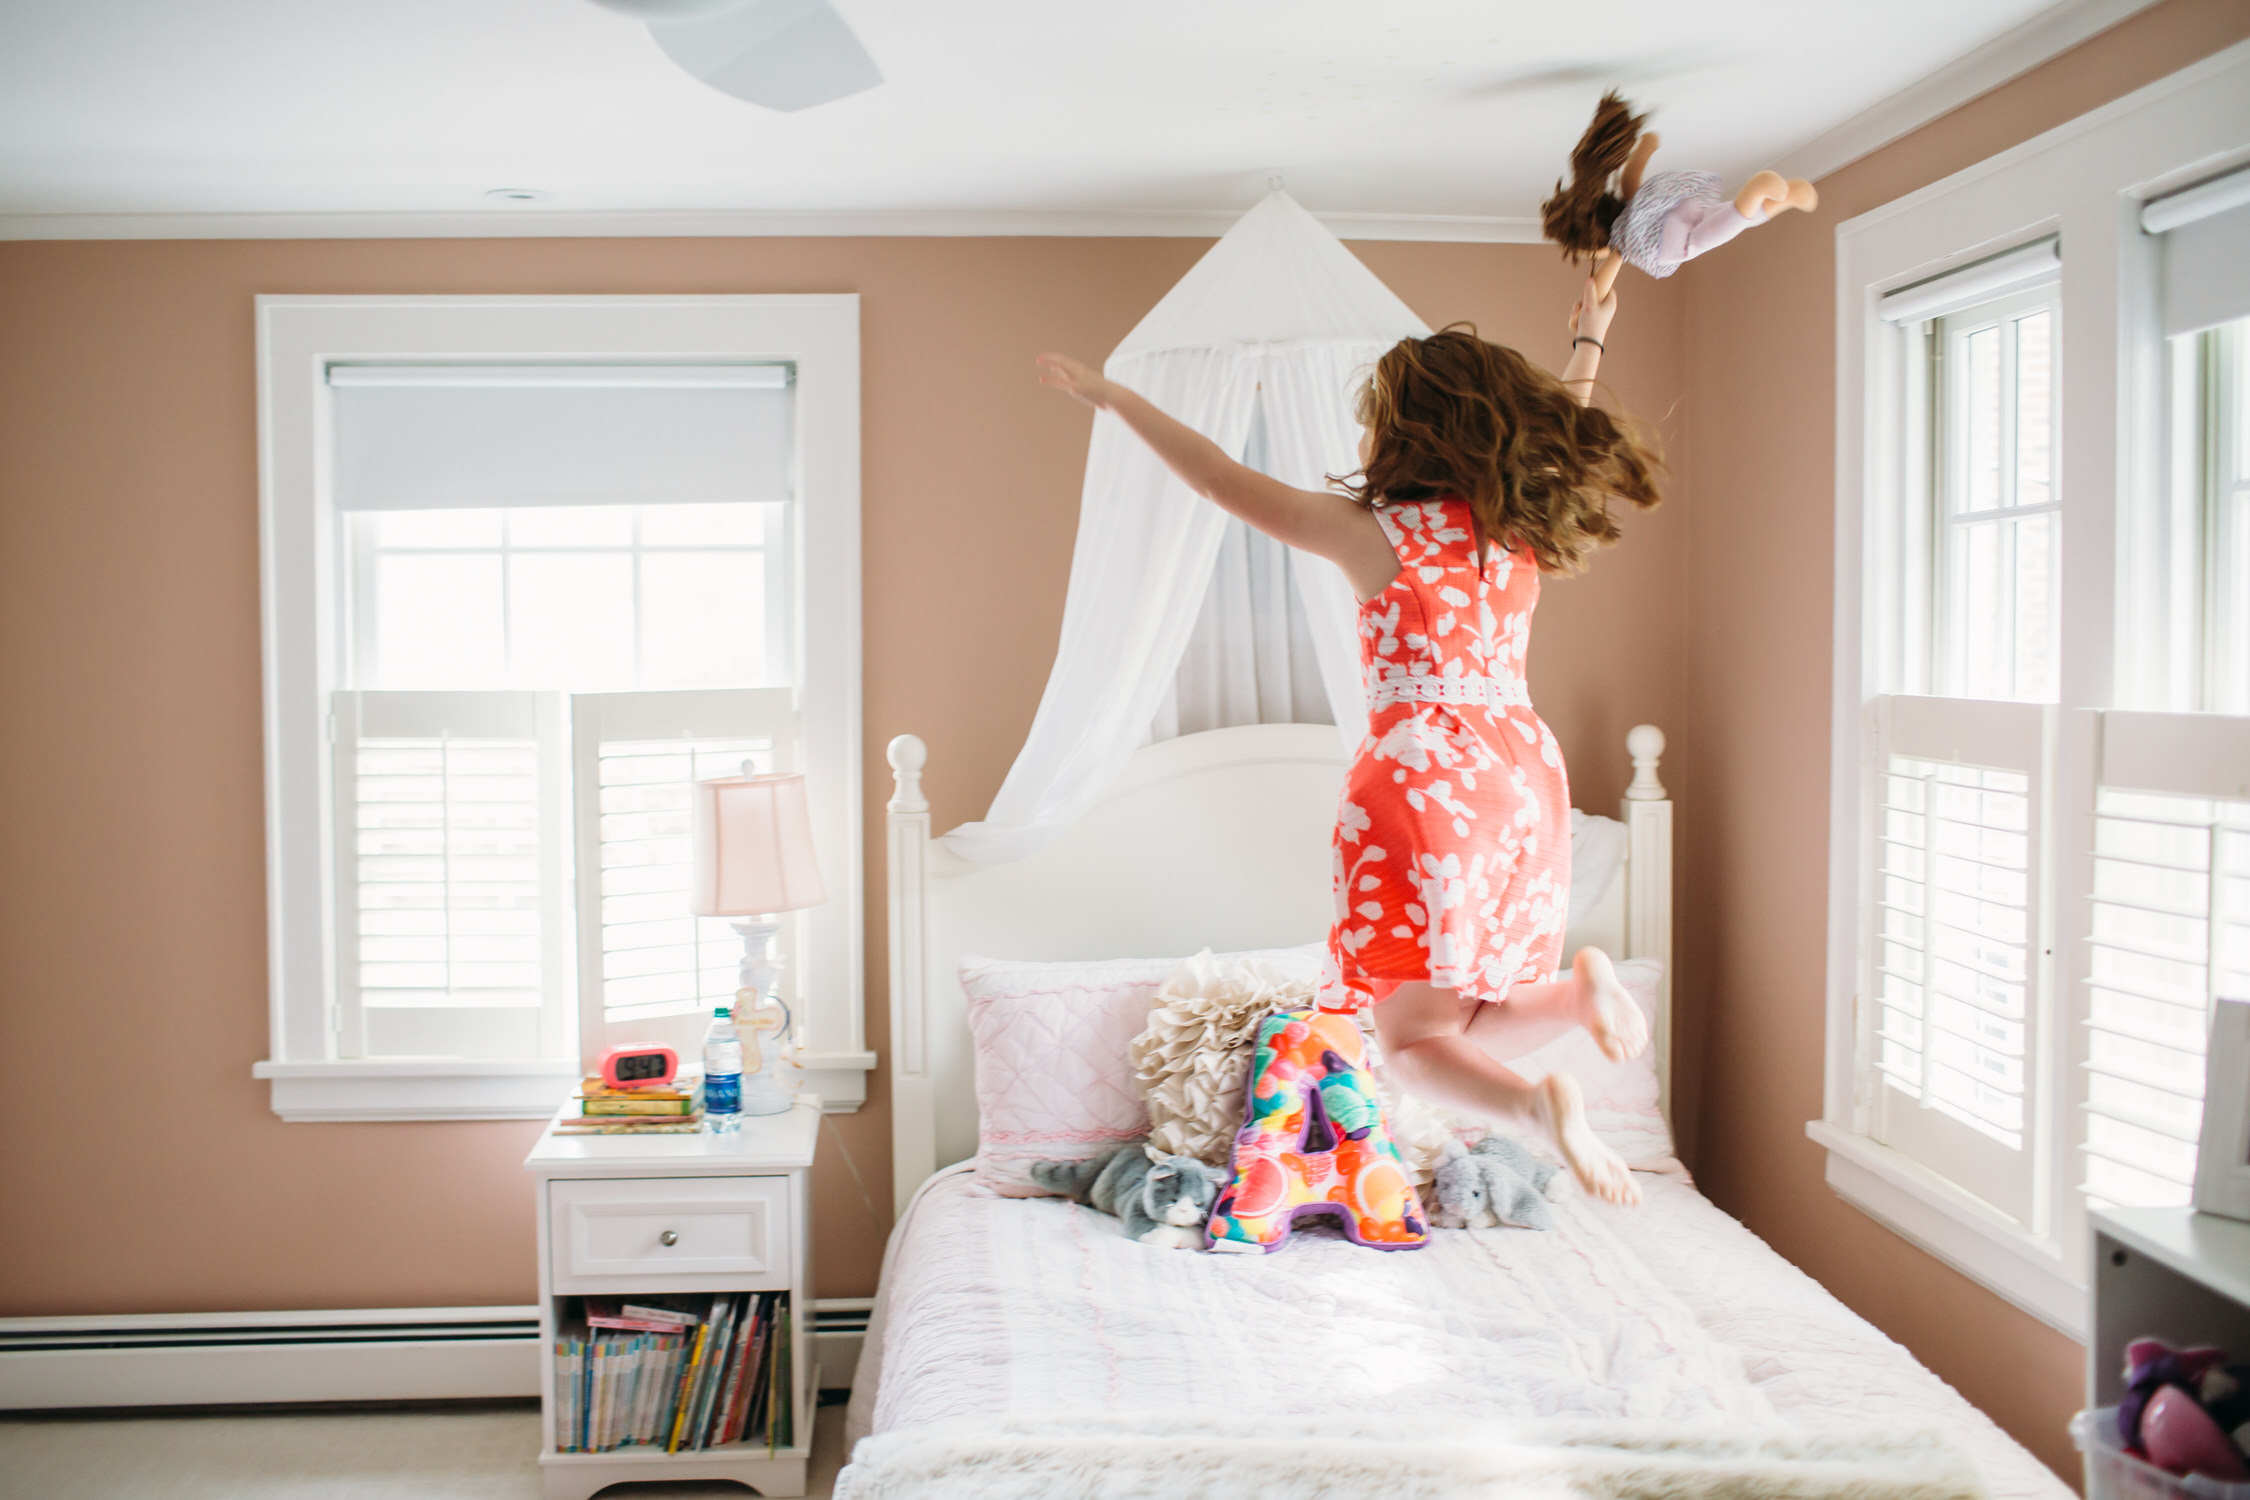 Kids jumping on the bed, Lifestyle family photos at home, Darien Connecticut